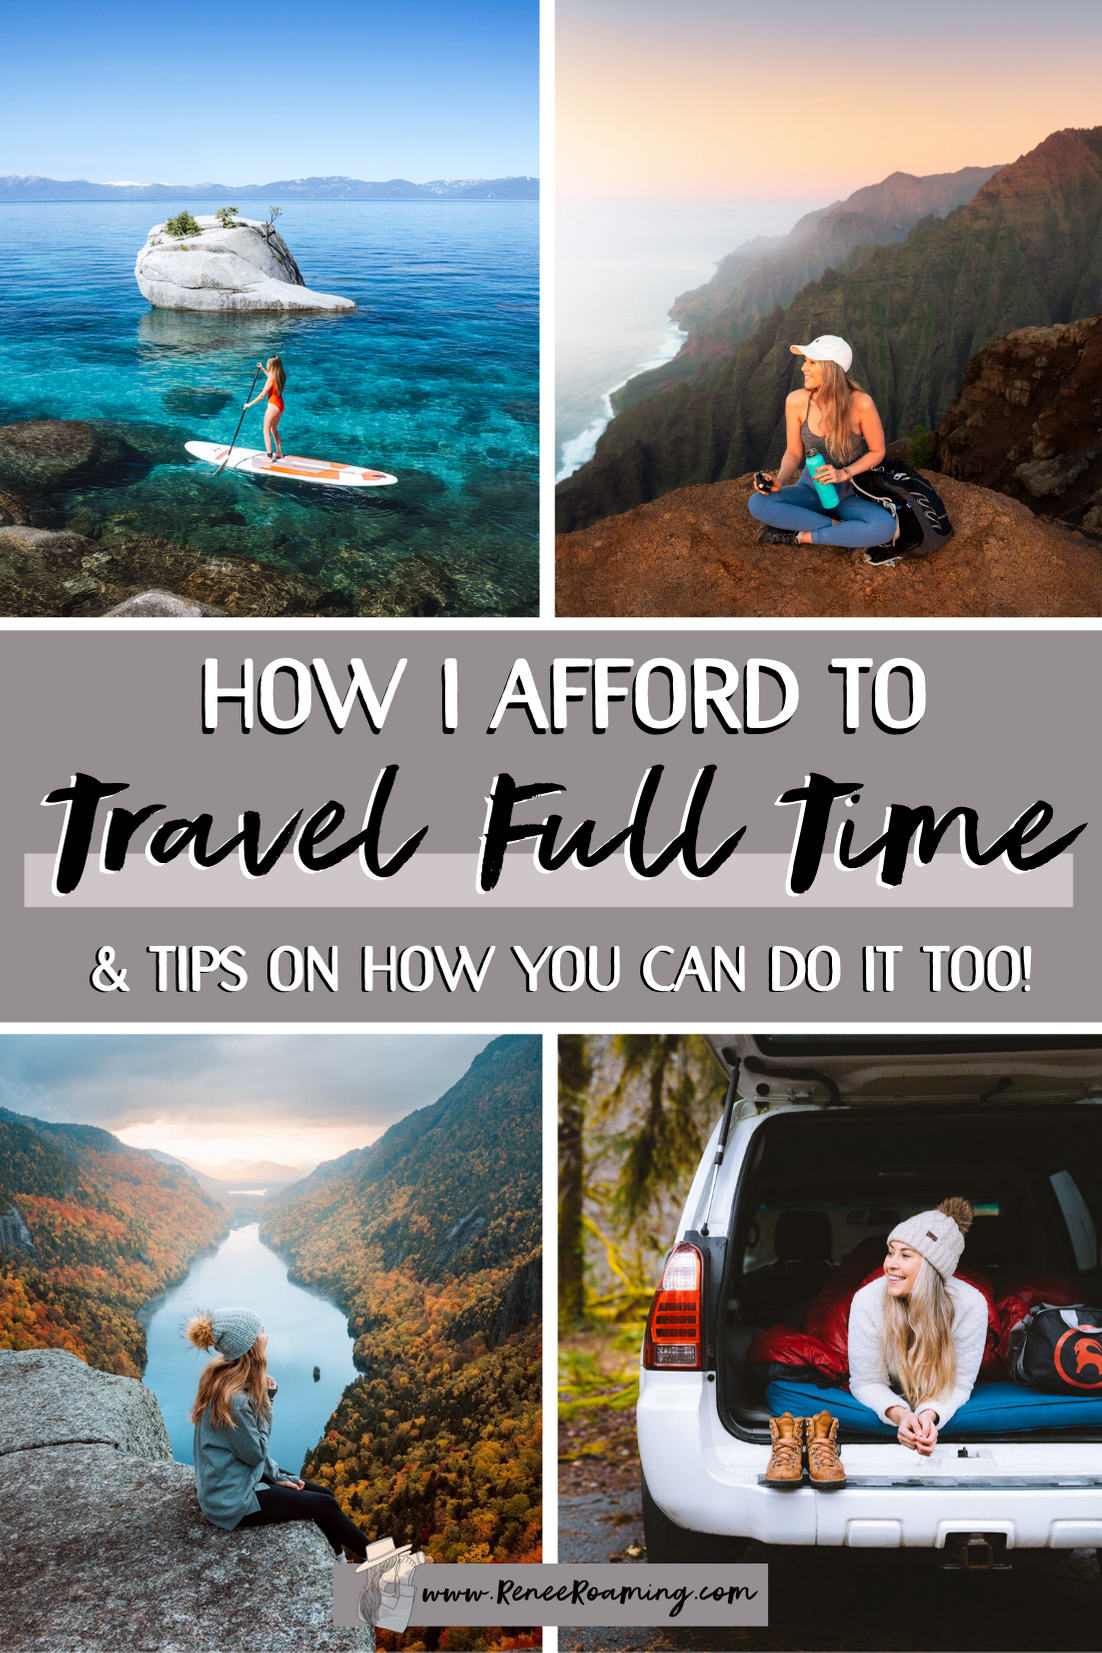 How To Travel Full Time - Must Know Tips for Affording to Travel the World